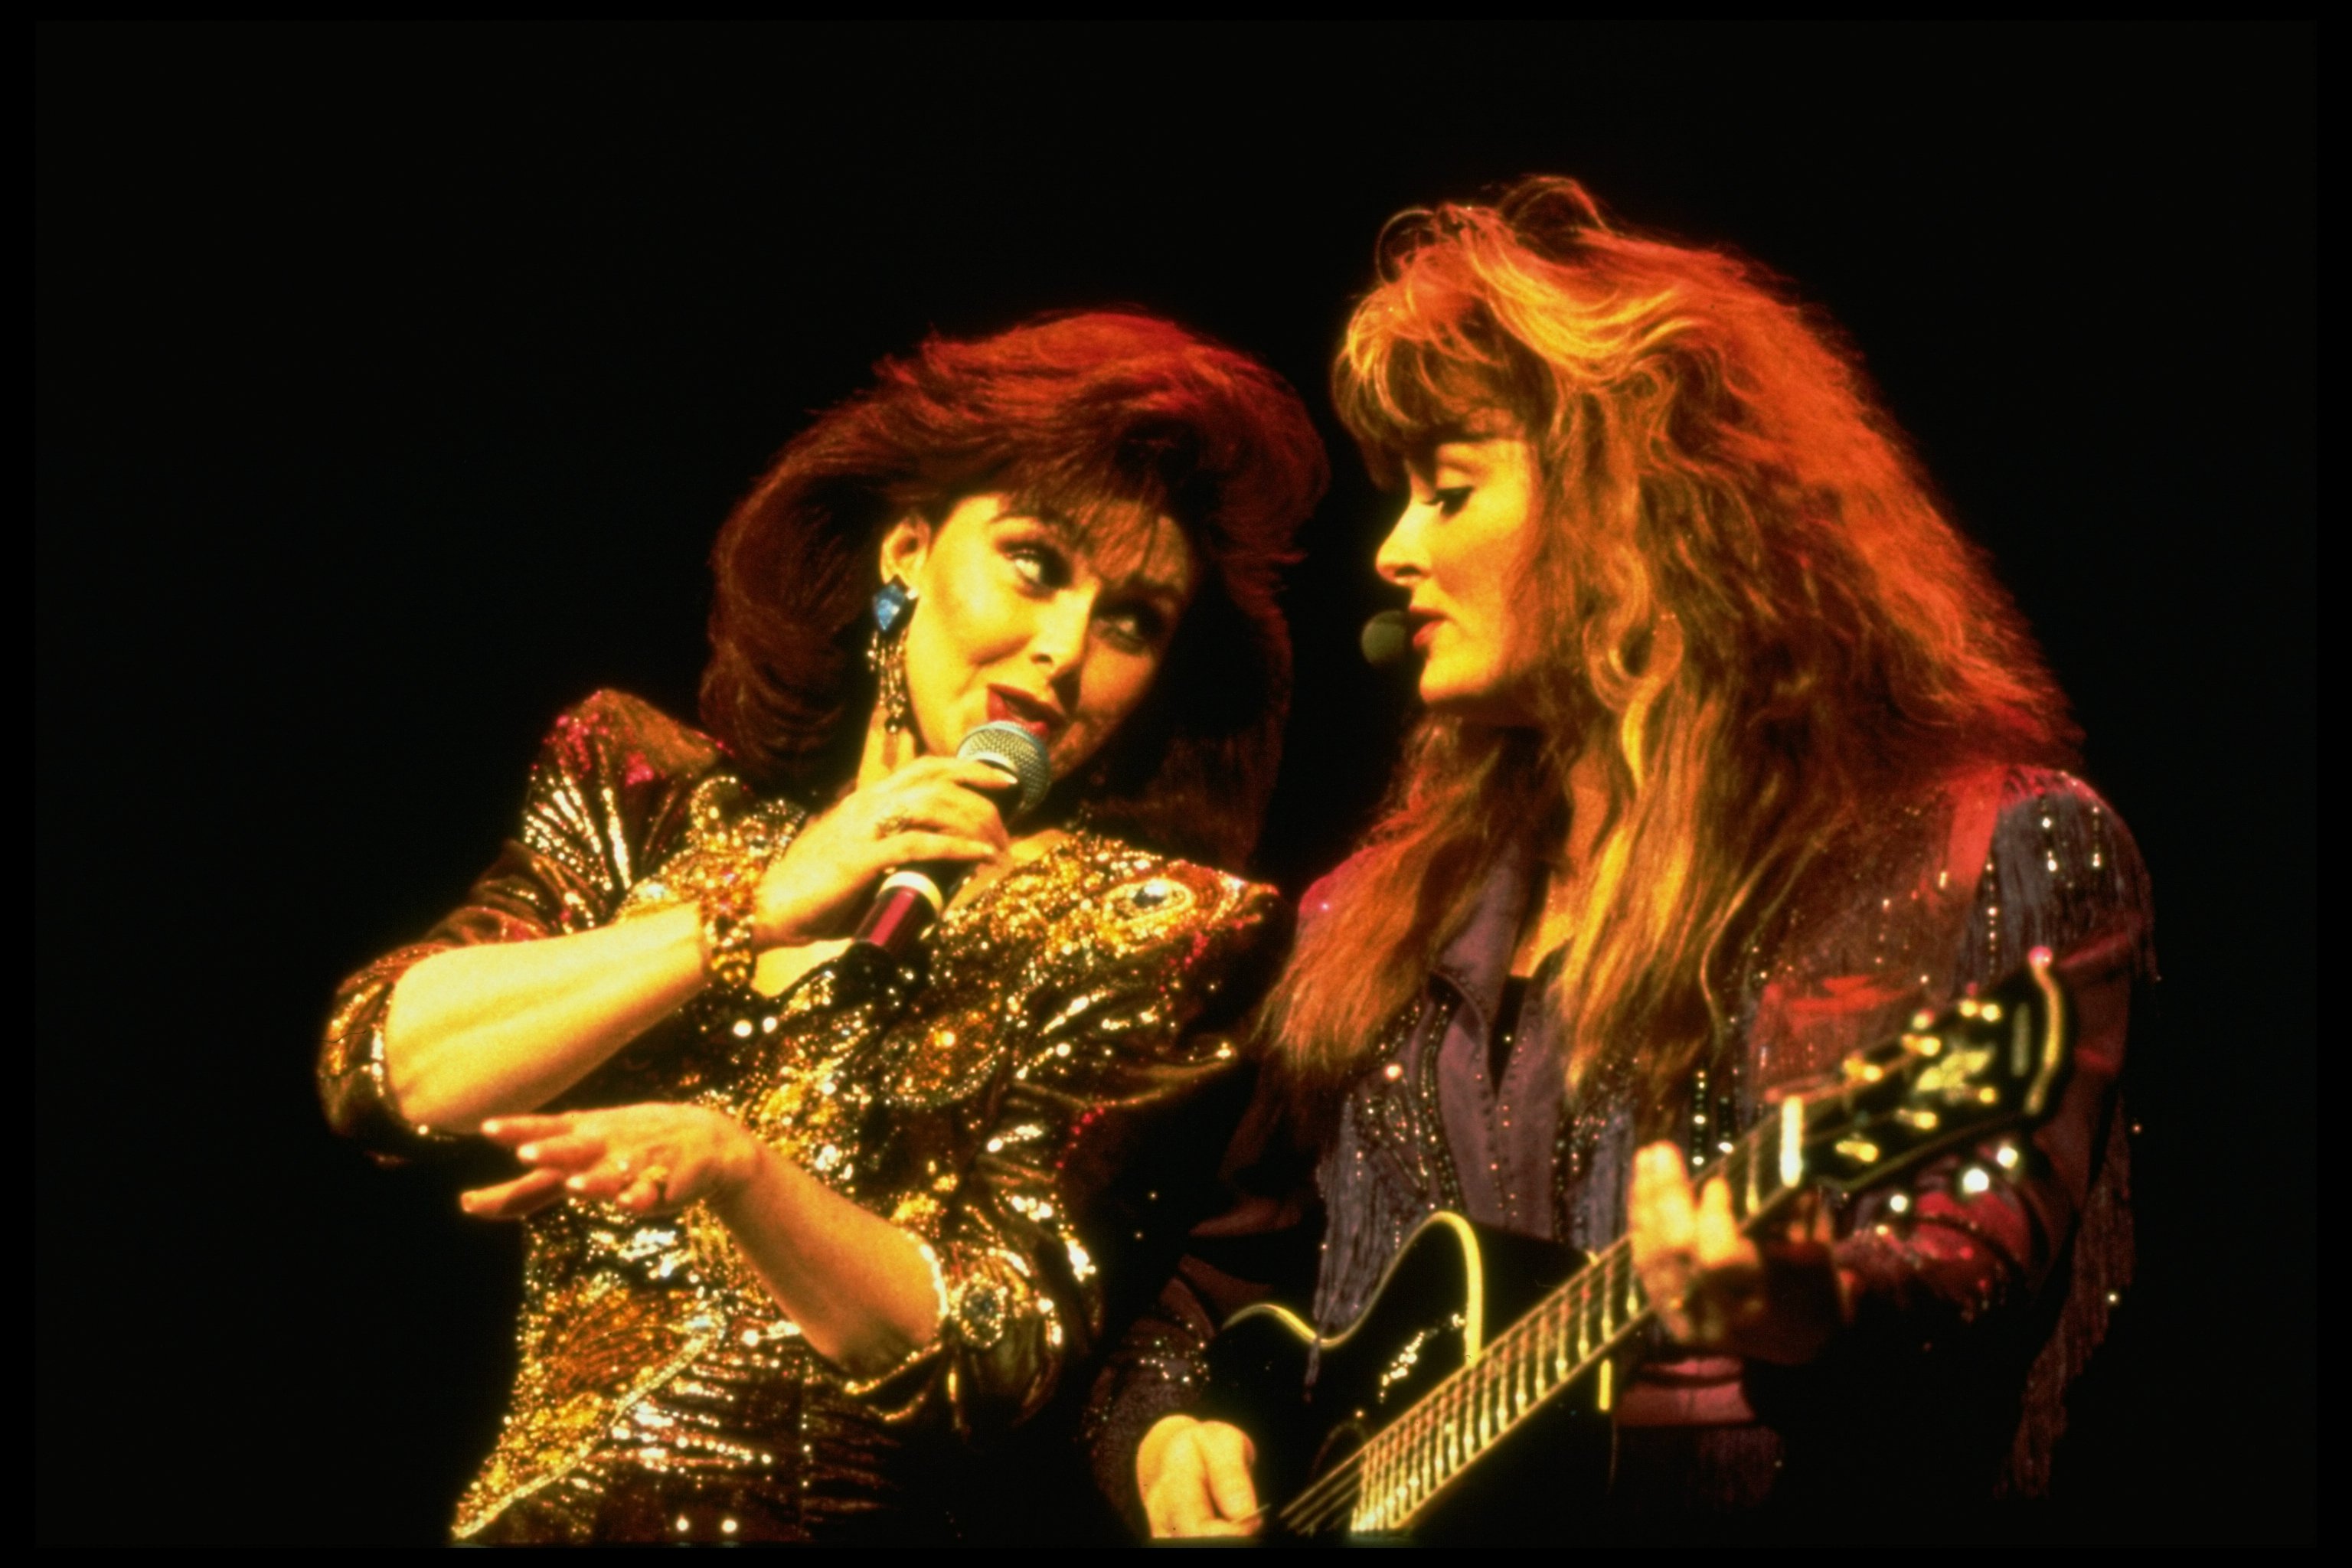 Naomi and Wynonna Judd singing in concert in 1990. | Source: Ron Wolfson/Getty Images